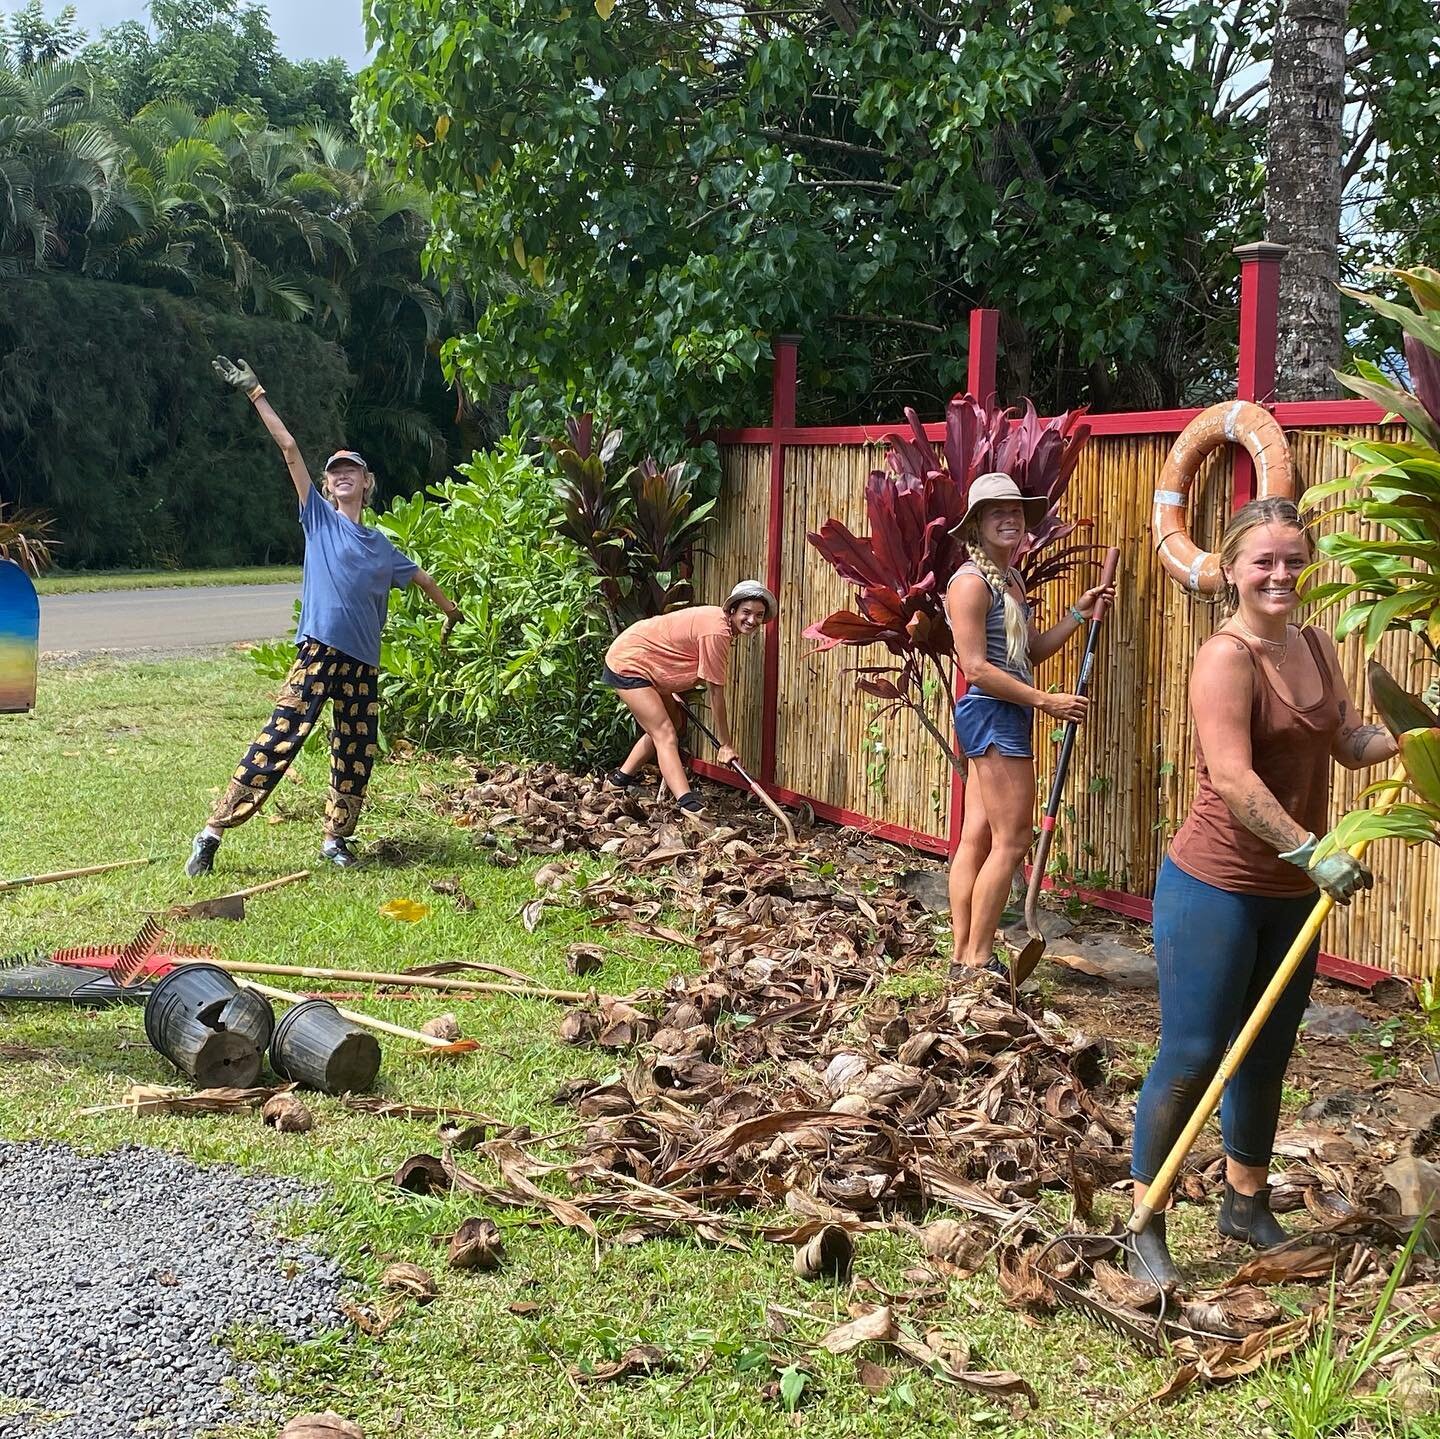 Female Strong! Excited to have our first ever all female wwoofing crew this summer! From landscaping to weeding, planting &amp; mulching, harvesting and processing, these girls have got it down! #femalestrong #alohaolafarms #wwoofing #farmlife #helpi